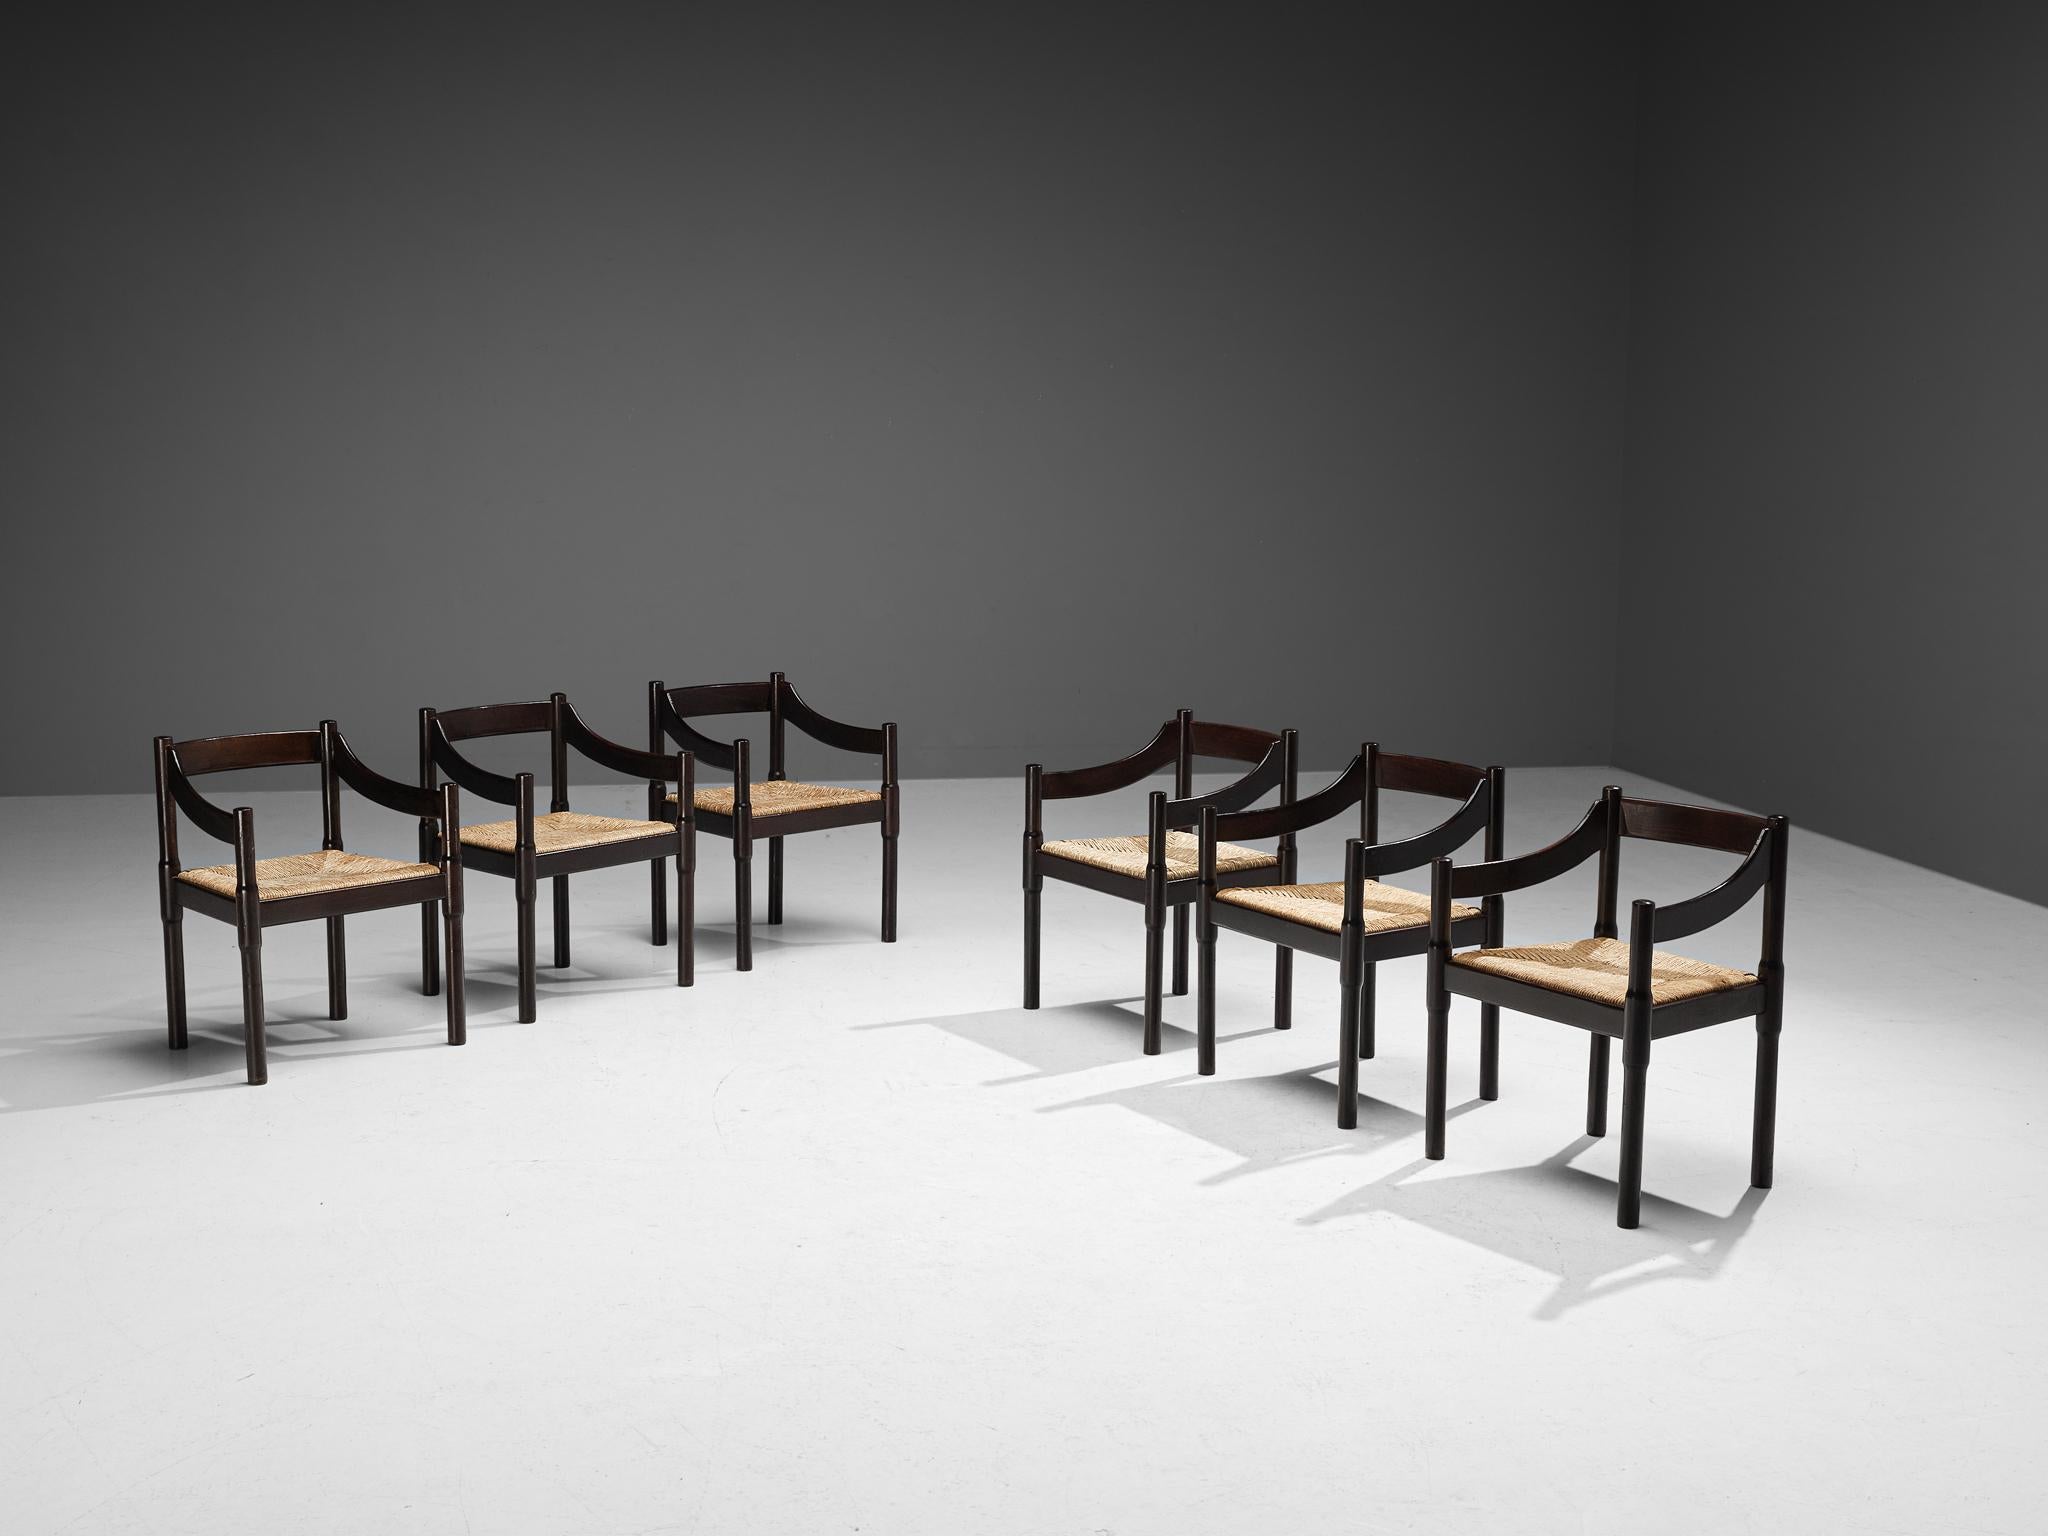 Vico Magistretti, set of six dining chairs model ‘Carimate’, stained beech, rush, Italy, designed circa 1960

The ‘Carimate’ chair is one of Vico Magistretti’s most famous chairs. Originally designed in a red color for the ‘Carimate Golf Club’ in